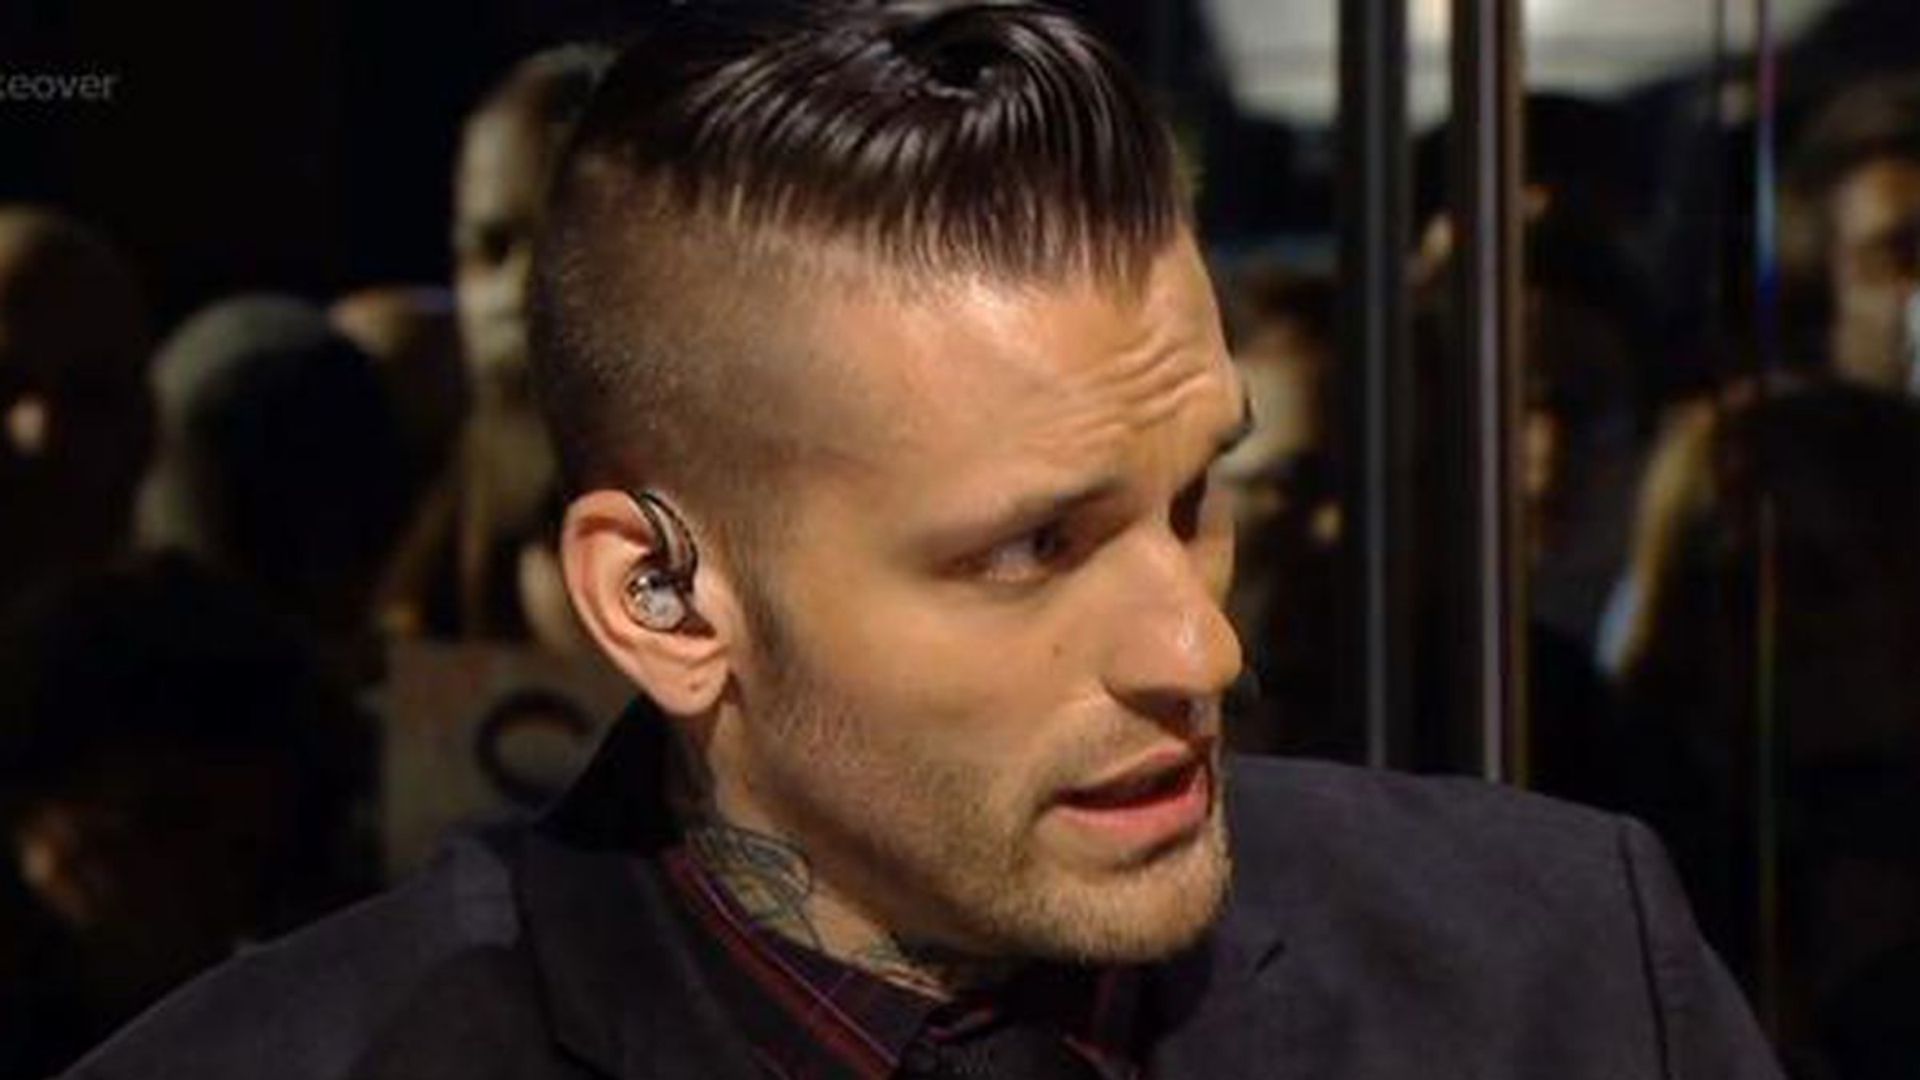 Corey Graves had something to say